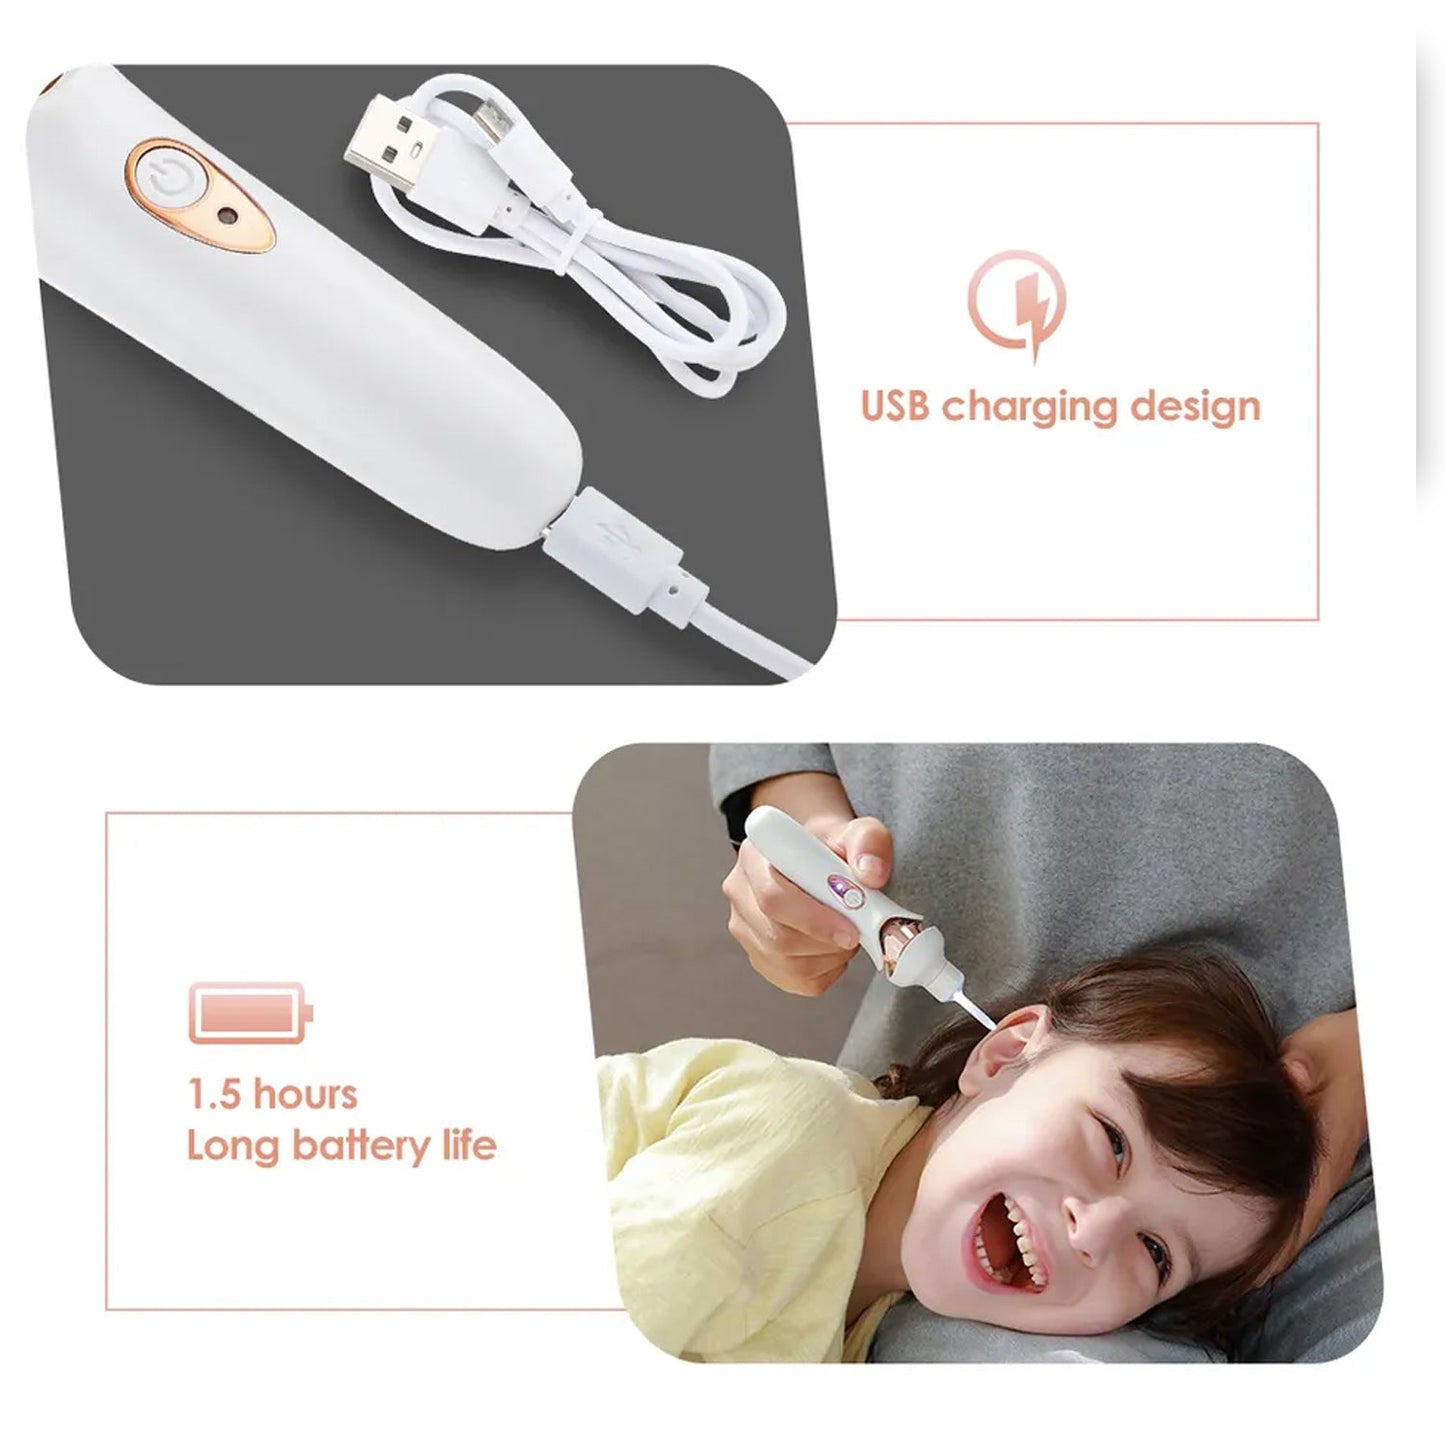 7707 EAR SUCTION DEVICE, PORTABLE COMFORTABLE EFFICIENT AUTOMATIC ELECTRIC VACUUM SOFT EAR PICK EAR CLEANER EASY EARWAX REMOVER SOFT PREVENT EAR-PICK CLEAN TOOLS SET FOR ADULTS KIDS - SWASTIK CREATIONS The Trend Point SWASTIK CREATIONS The Trend Point